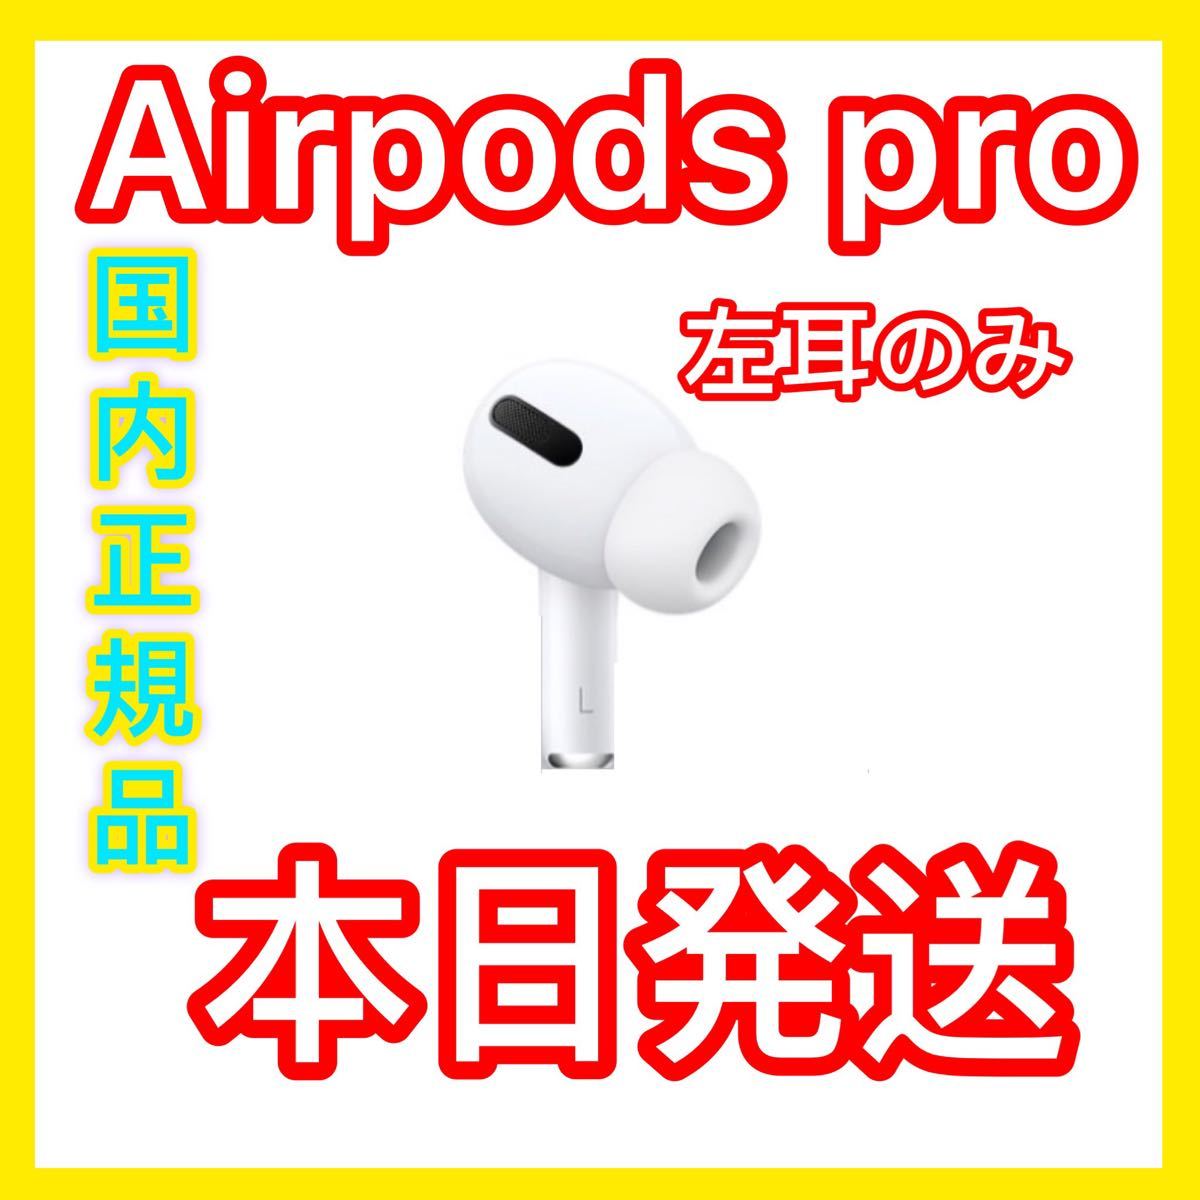 AirPods Pro エアーポッズ AirPodsPro 左耳のみ プロ L片耳のみ イヤホン Apple イヤフォン ccorca.org